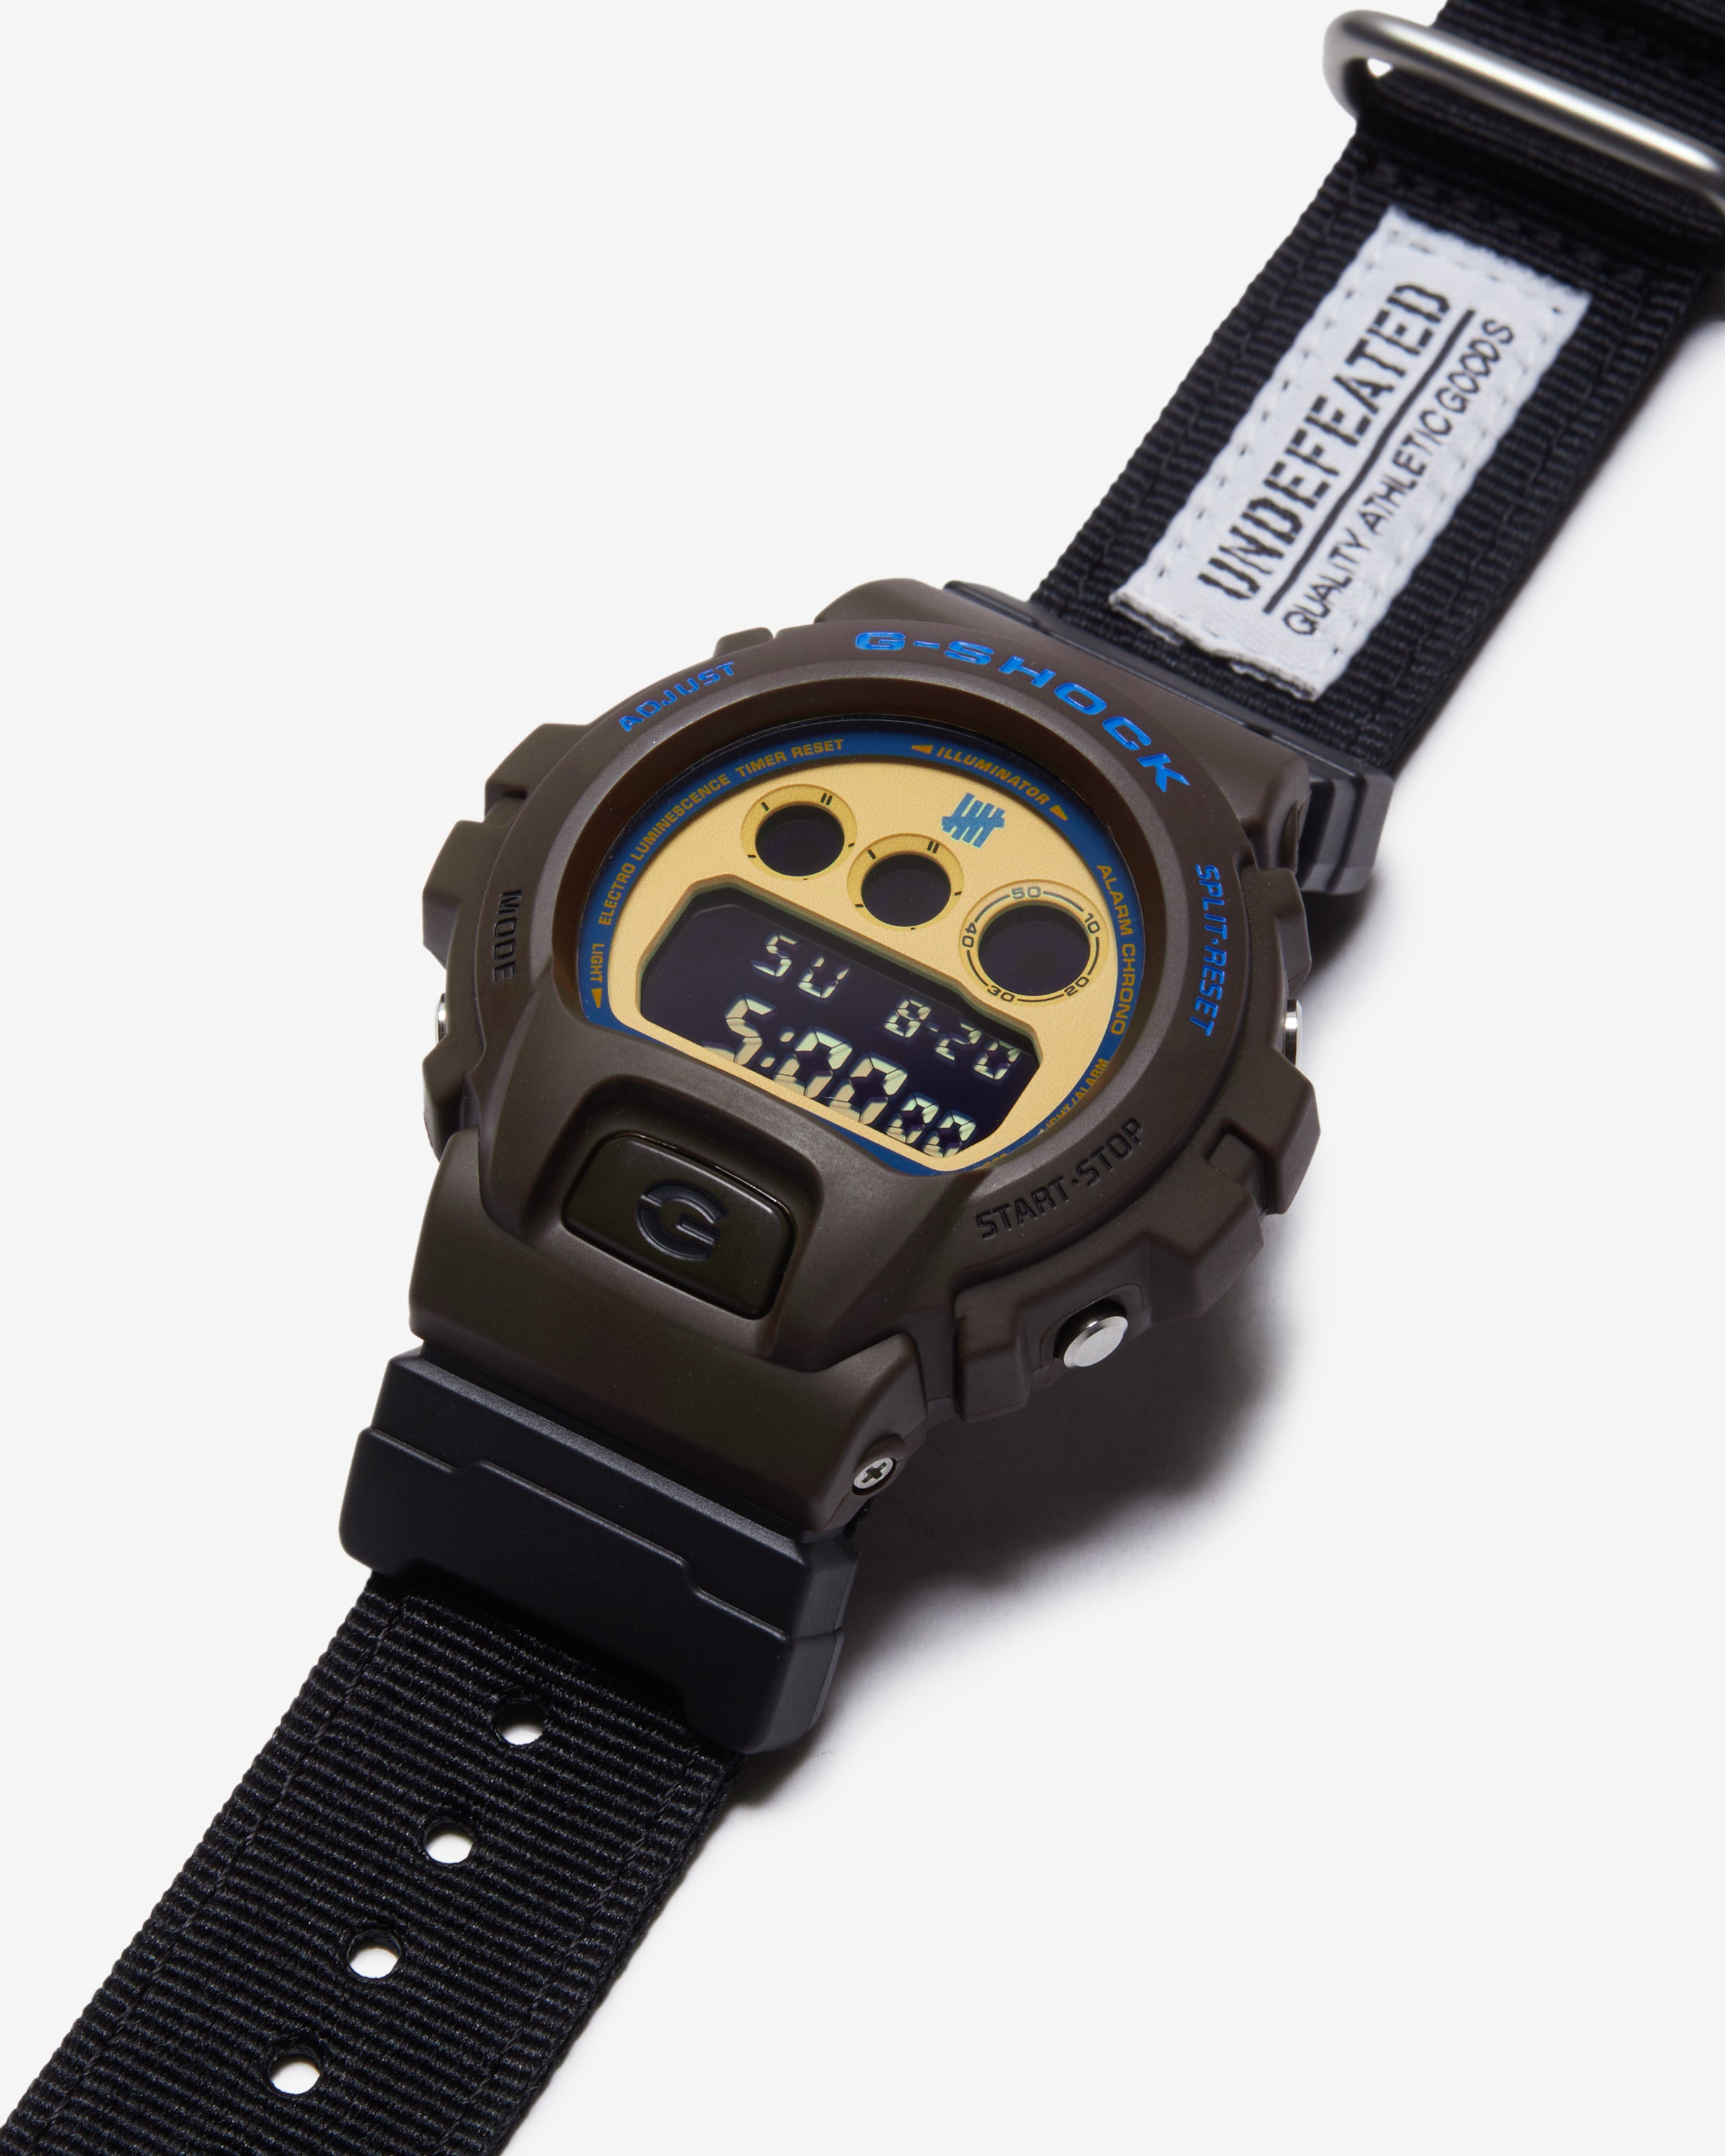 UNDEFEATED X G-SHOCK DW6900UDCR23-5 - BROWN/ YELLOW/ BLUE